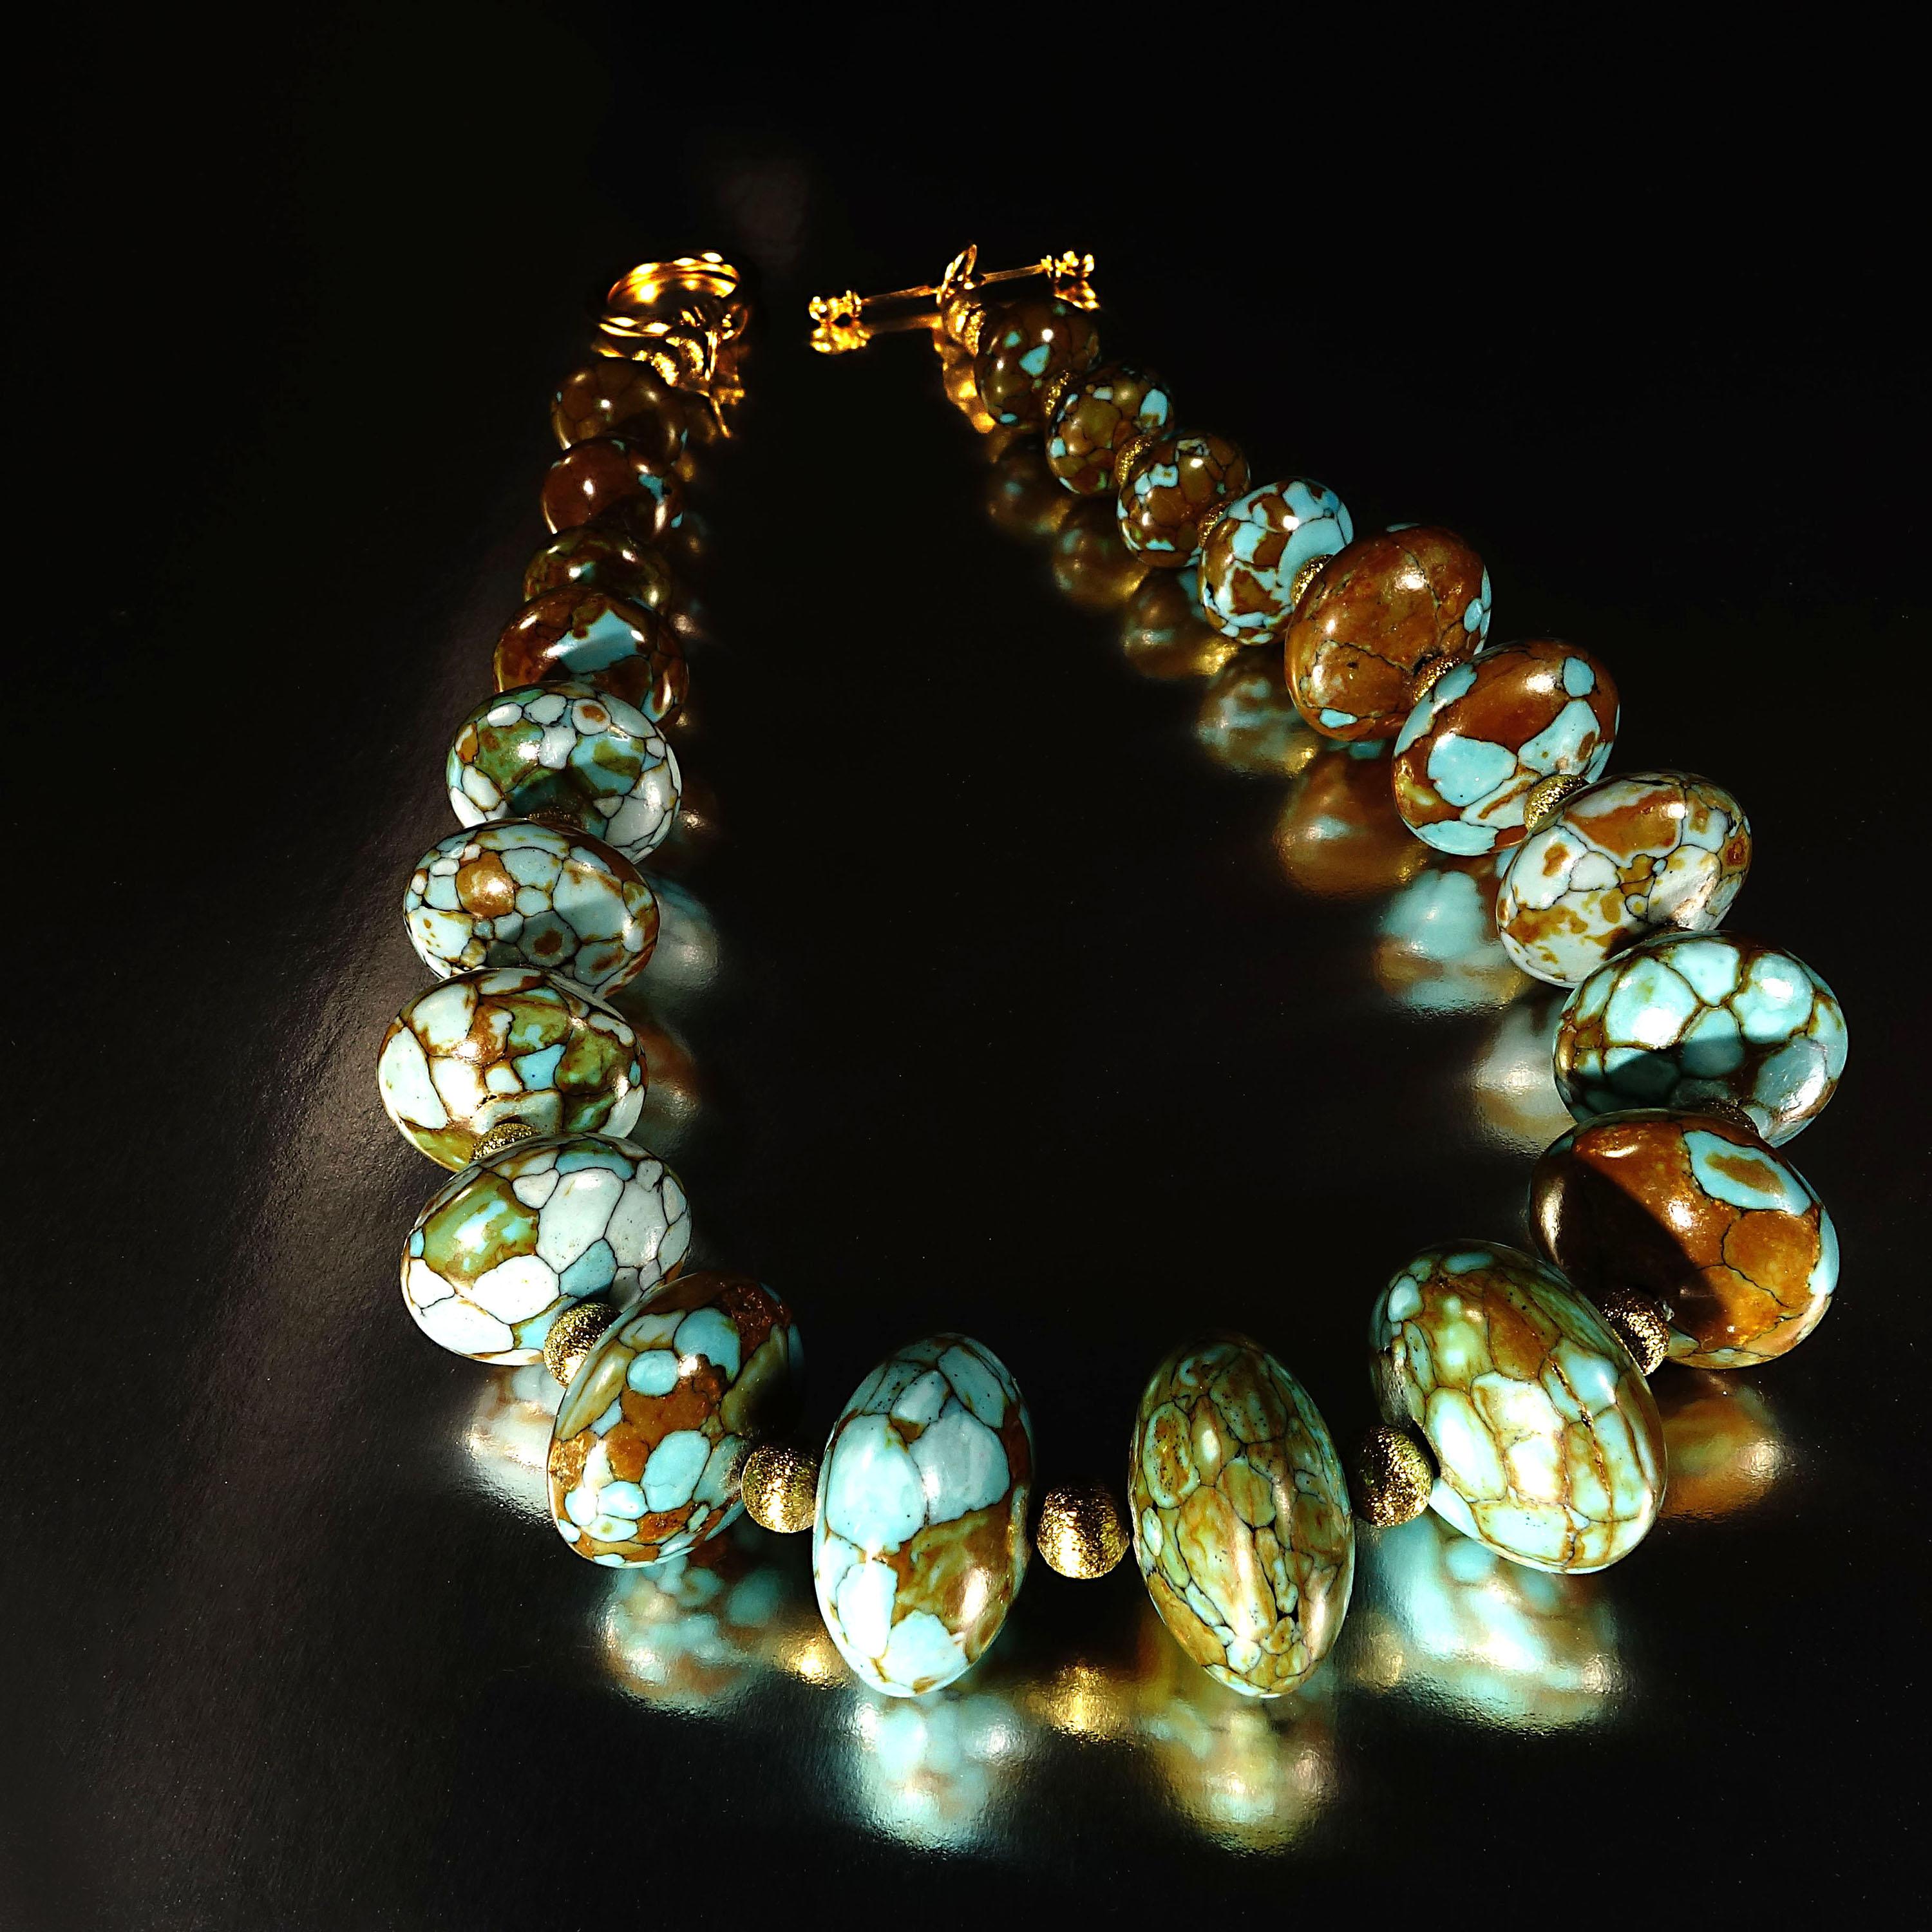 Fabulous Fashion necklace of Chinese composite Rondelles of Turquoise in mottled shades of greens and browns. The frosted antique gold tone spacers set off the Turquoise. The necklace is choker length at 14 inches and has a gold tone toggle clasp.